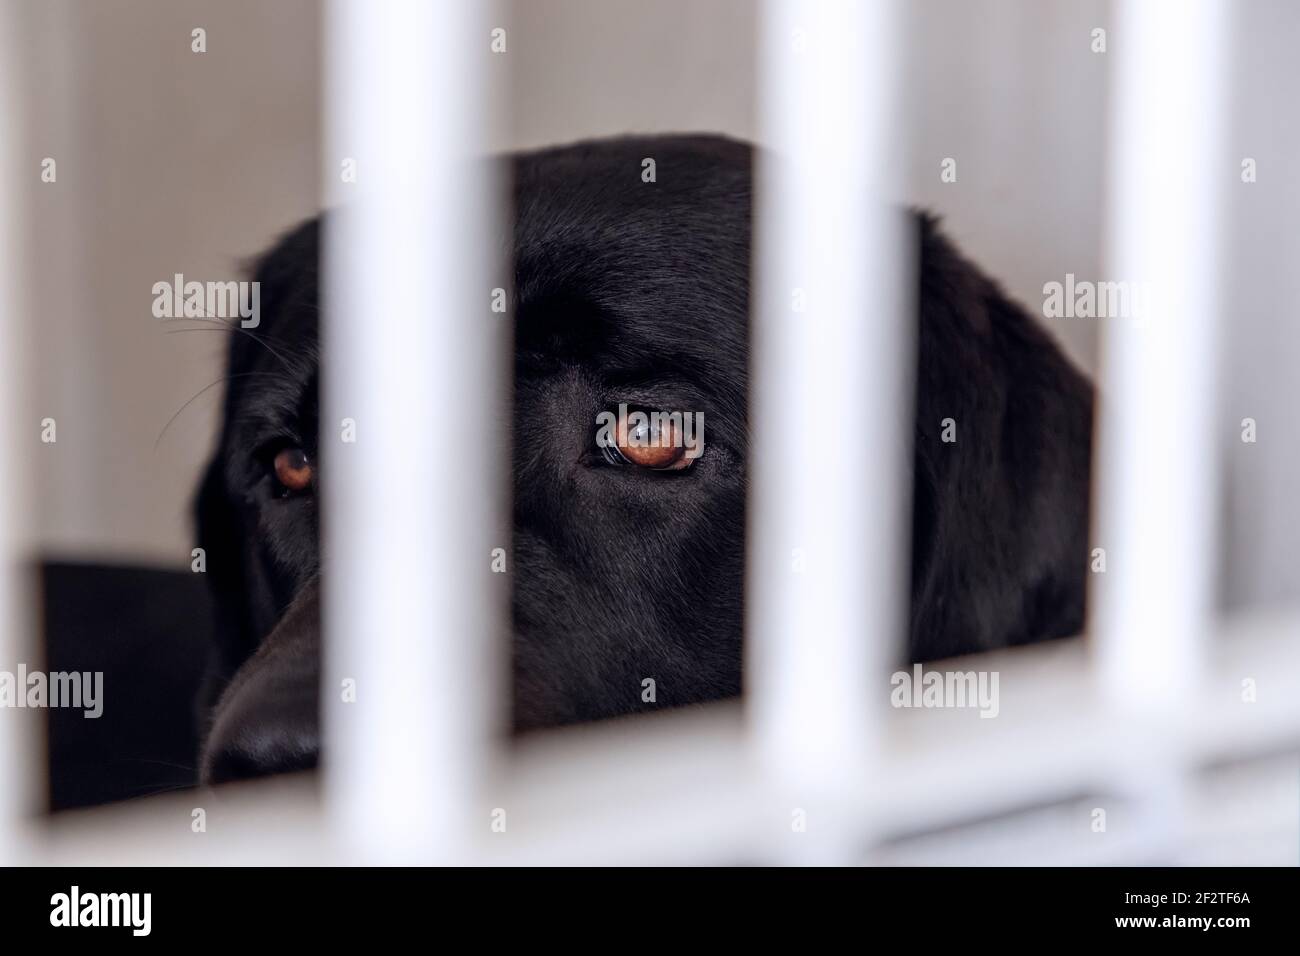 Unhappy and sad dog in a cage. Dog at an animal shelter looks through a cage. Dog behind bars in an animal shelter. Stock Photo